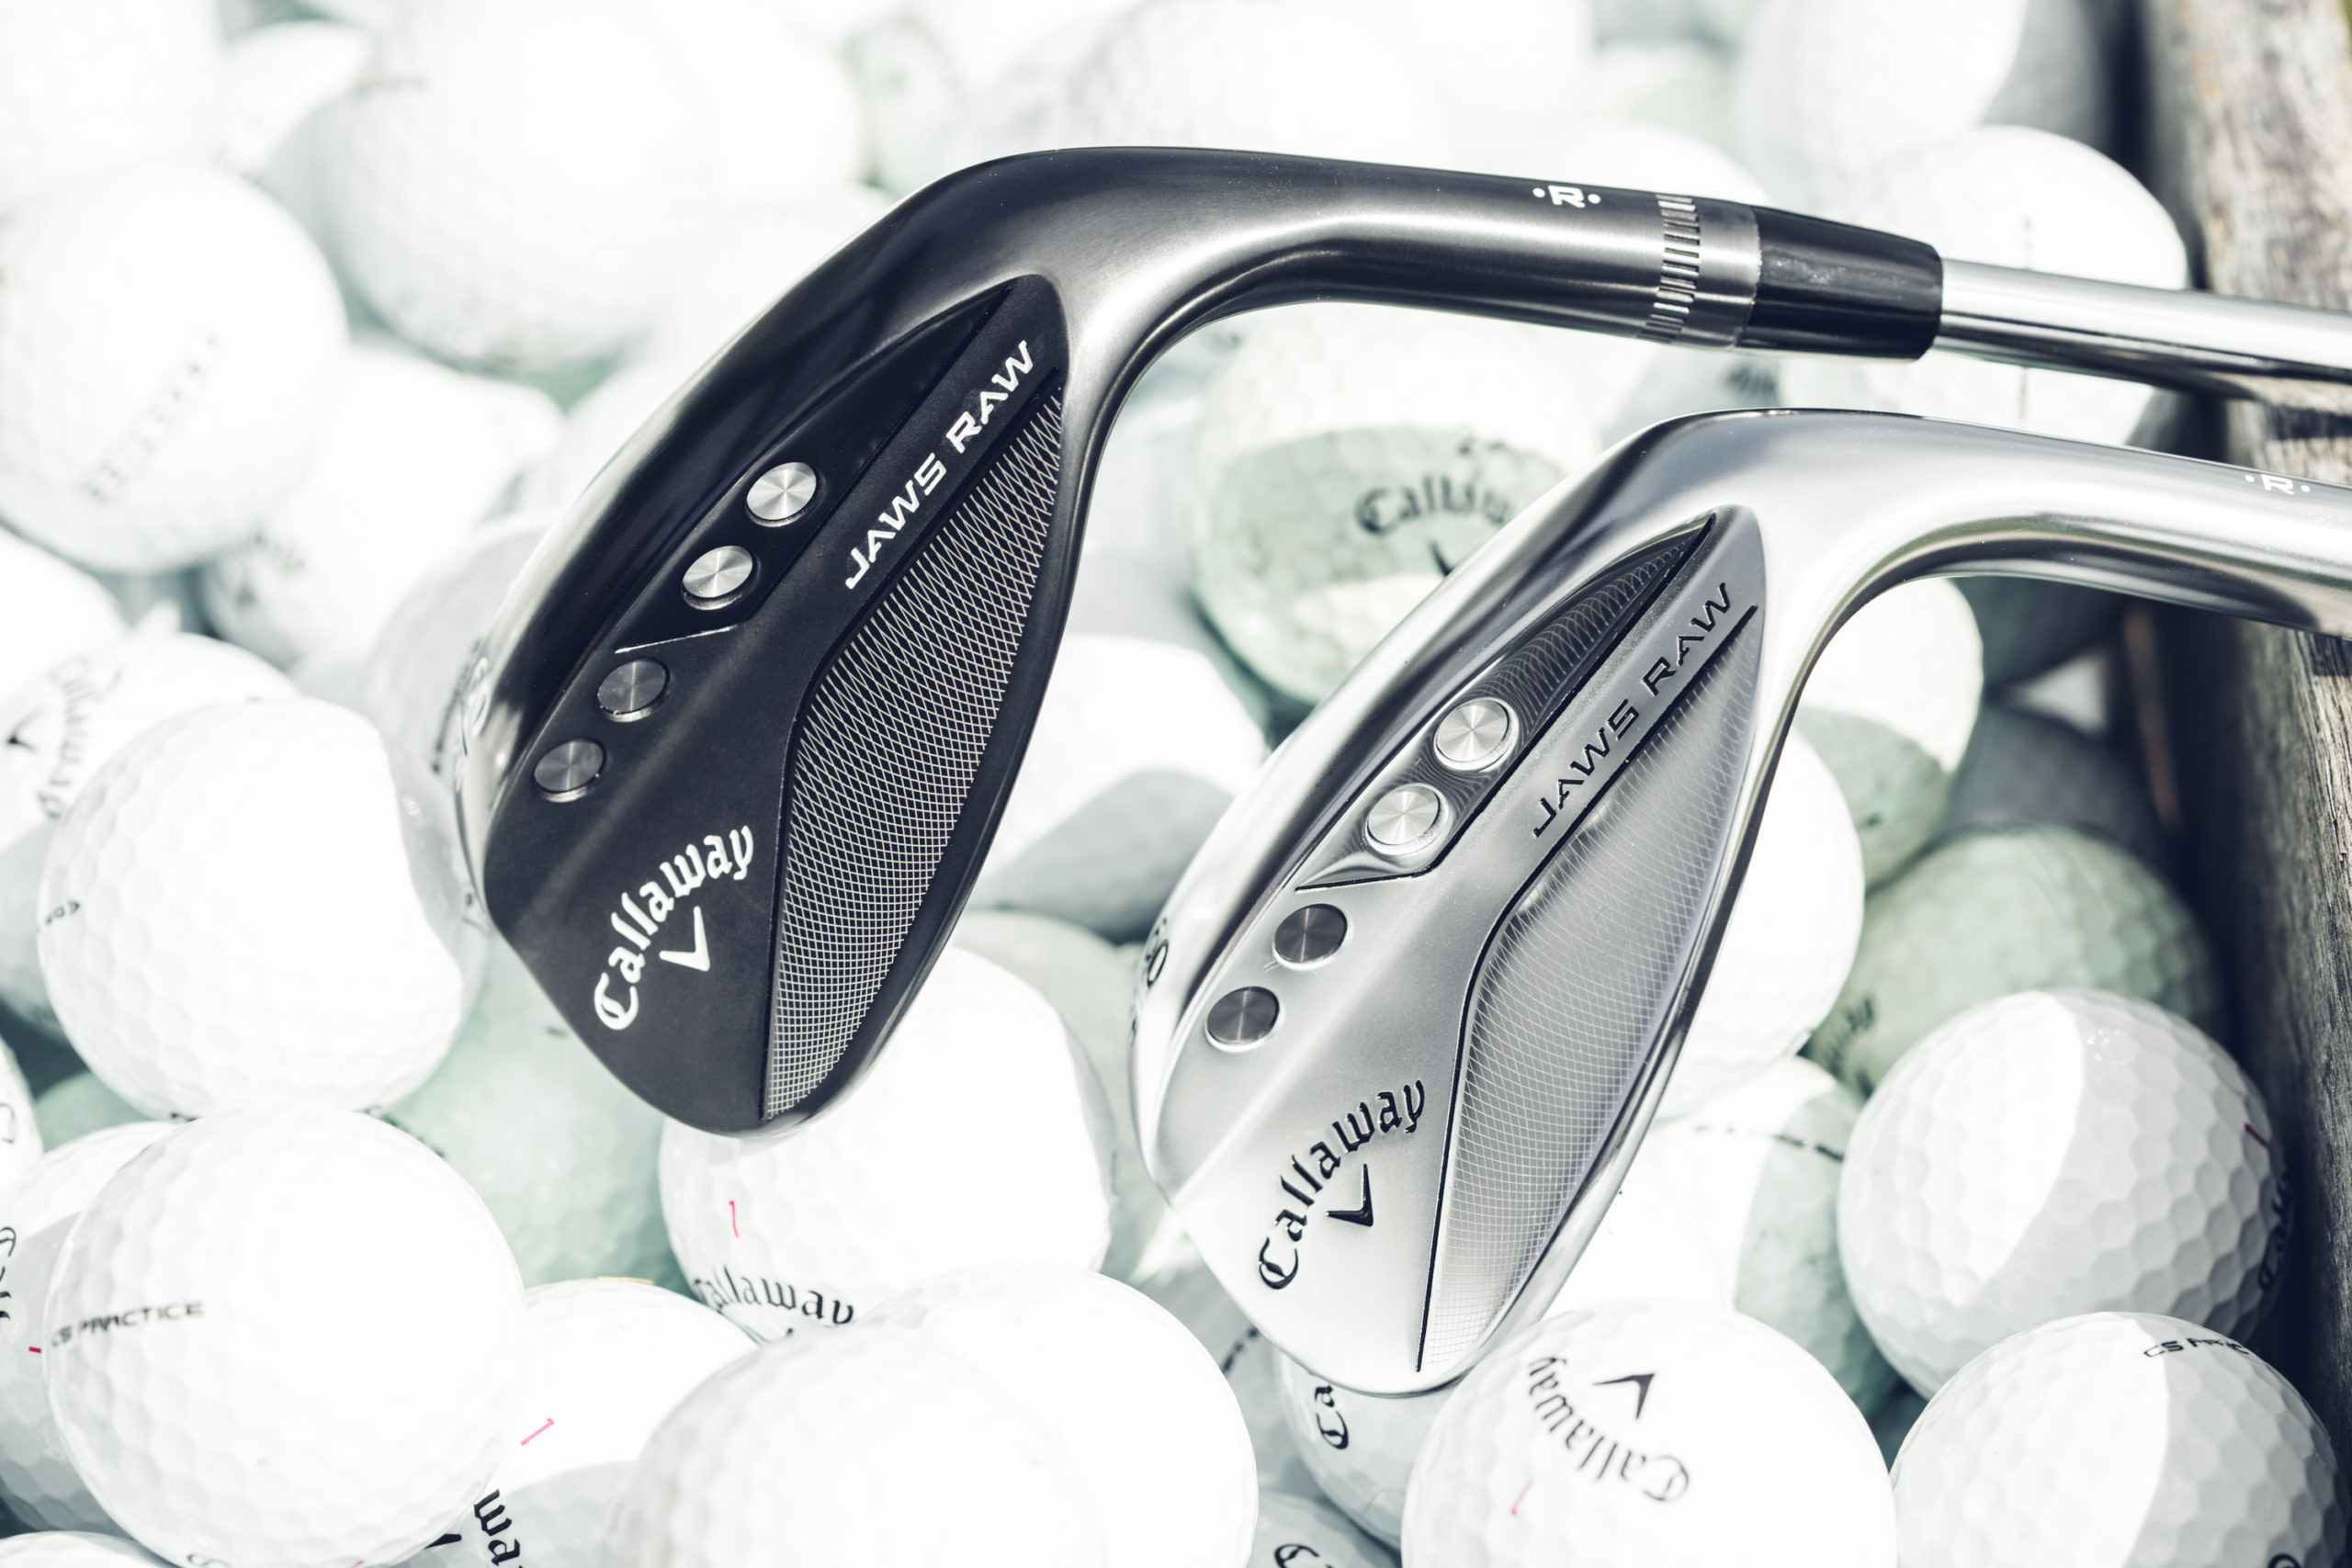 NEW CALLAWAY JAWS RAW WEDGES: TOTAL SPIN MACHINES